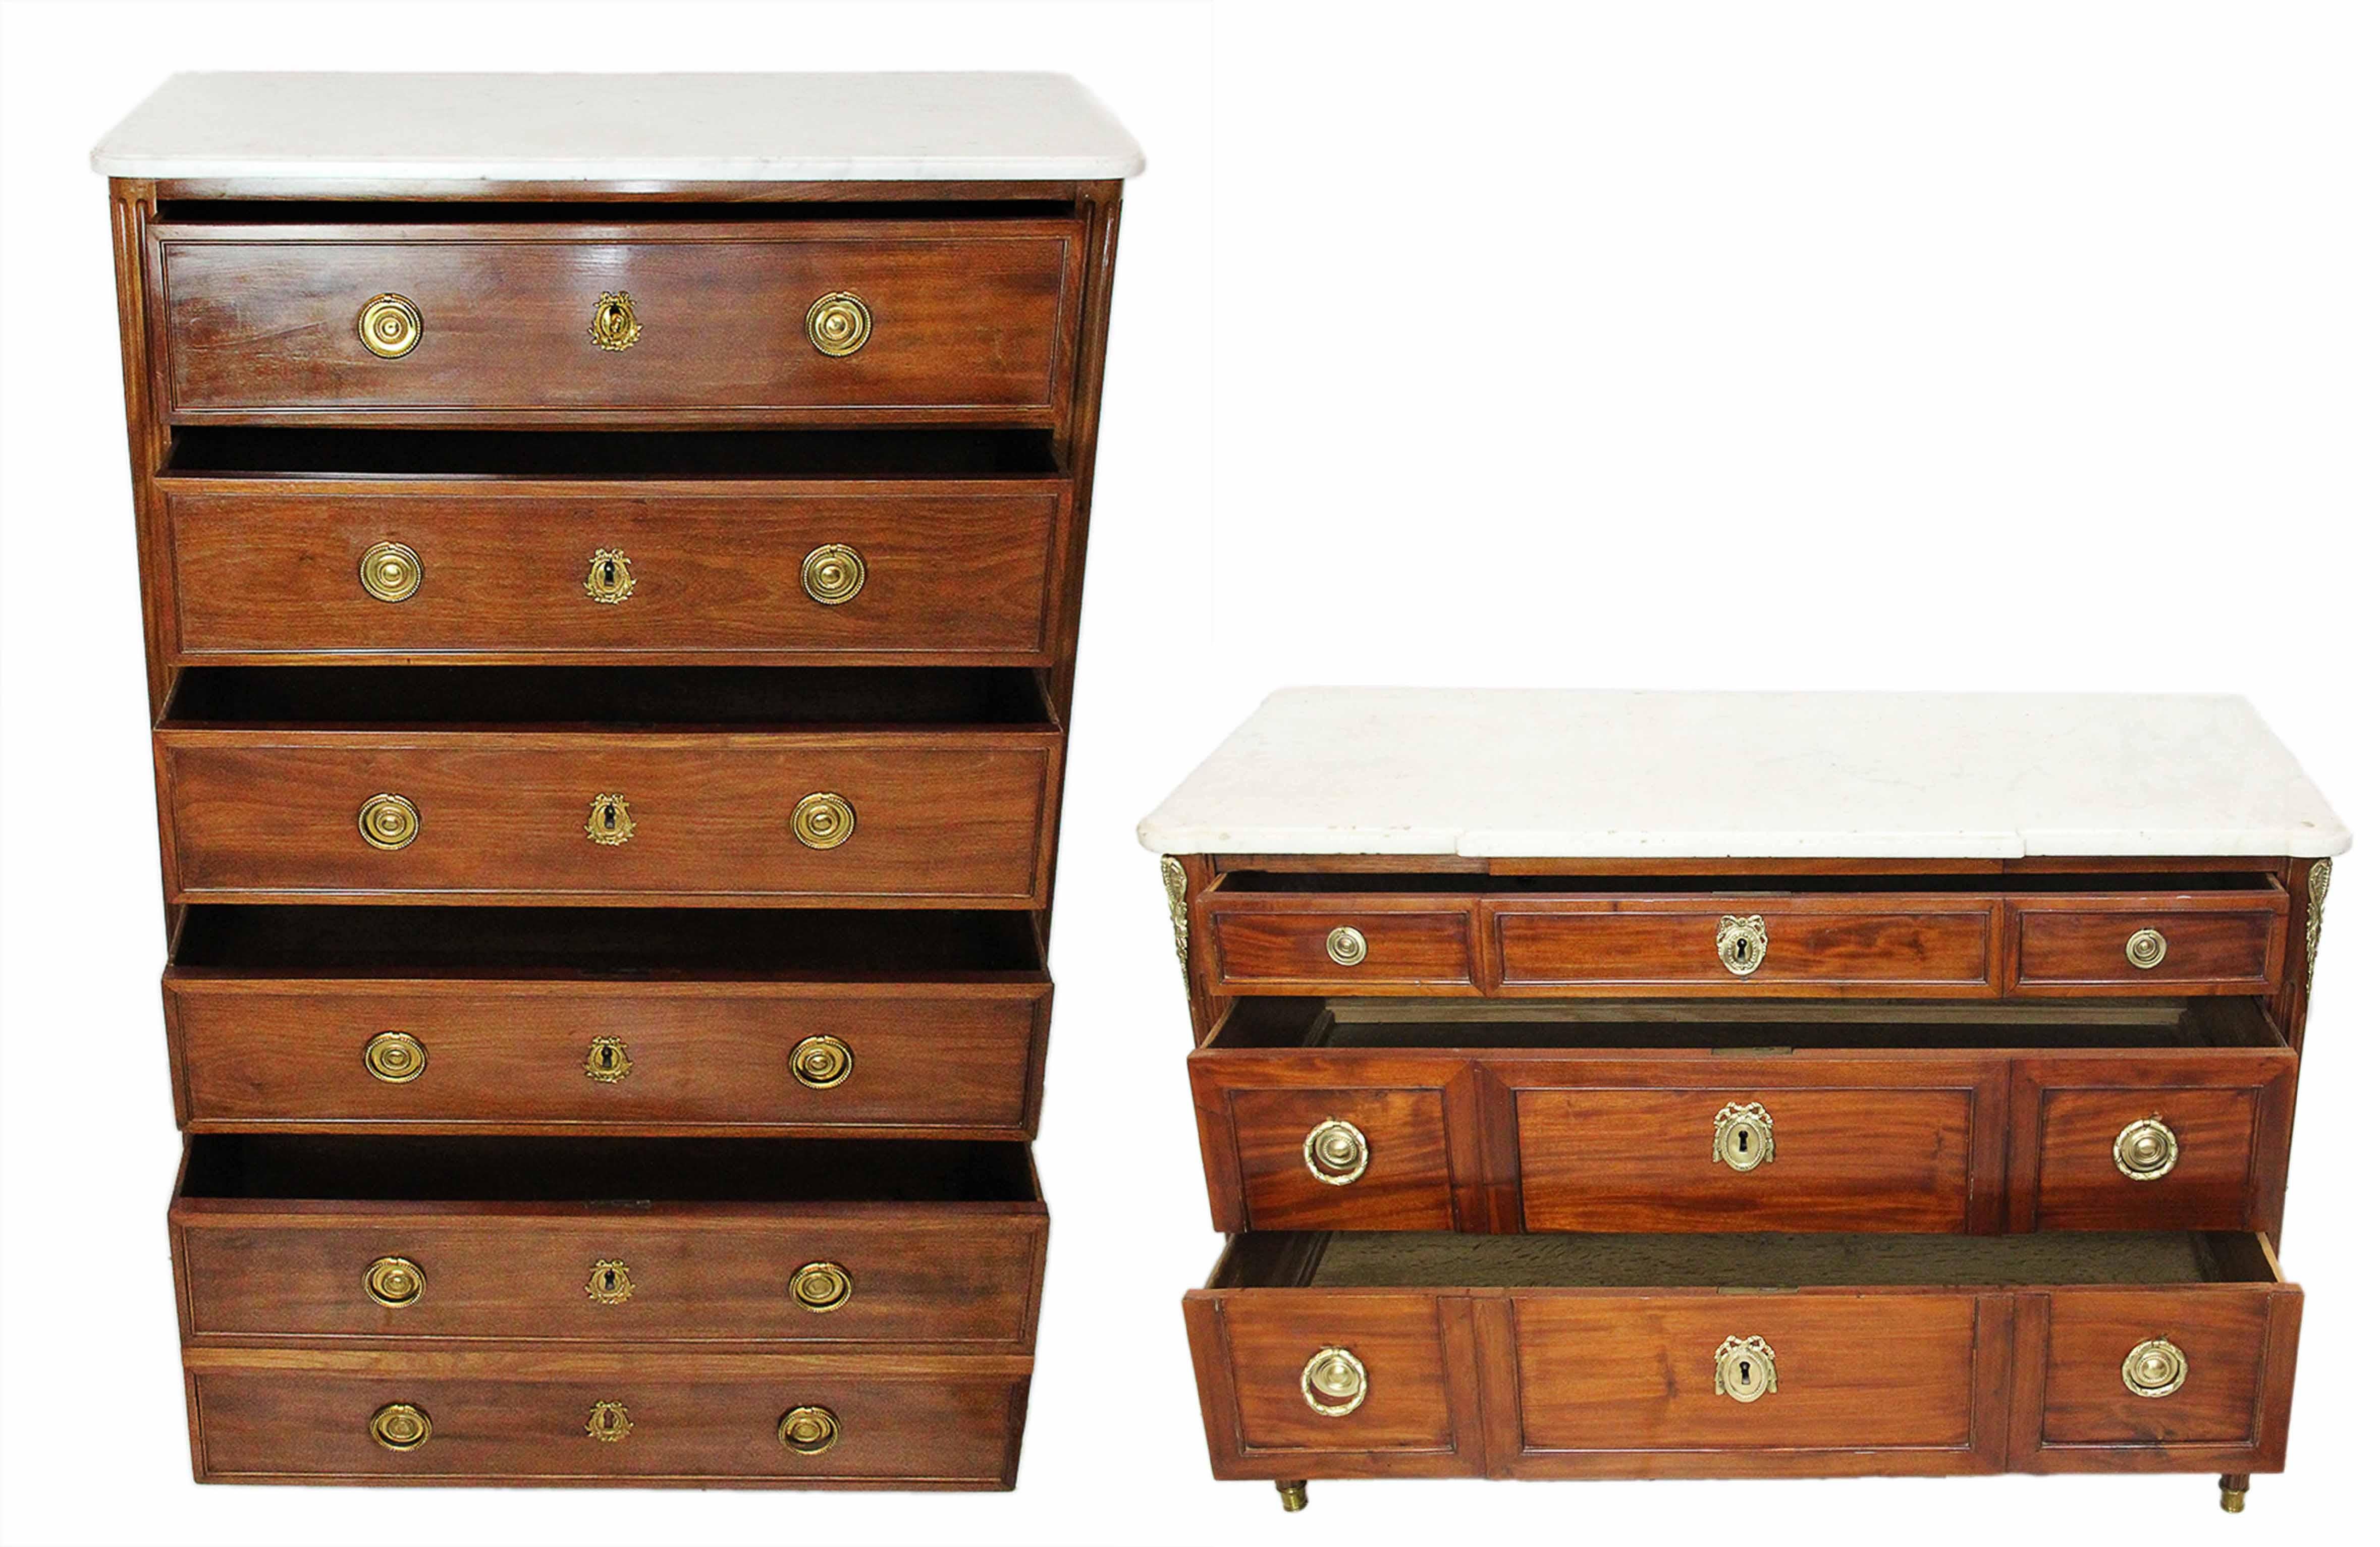 18th century set of chest (commode and chest on chest) in mahogany and white marble Stamped Conrad MAUTER
Mahogany and tiger mahogany veneer chest on chest and chest of drawers, white veined marble top, rounded uprights, tapered and fluted